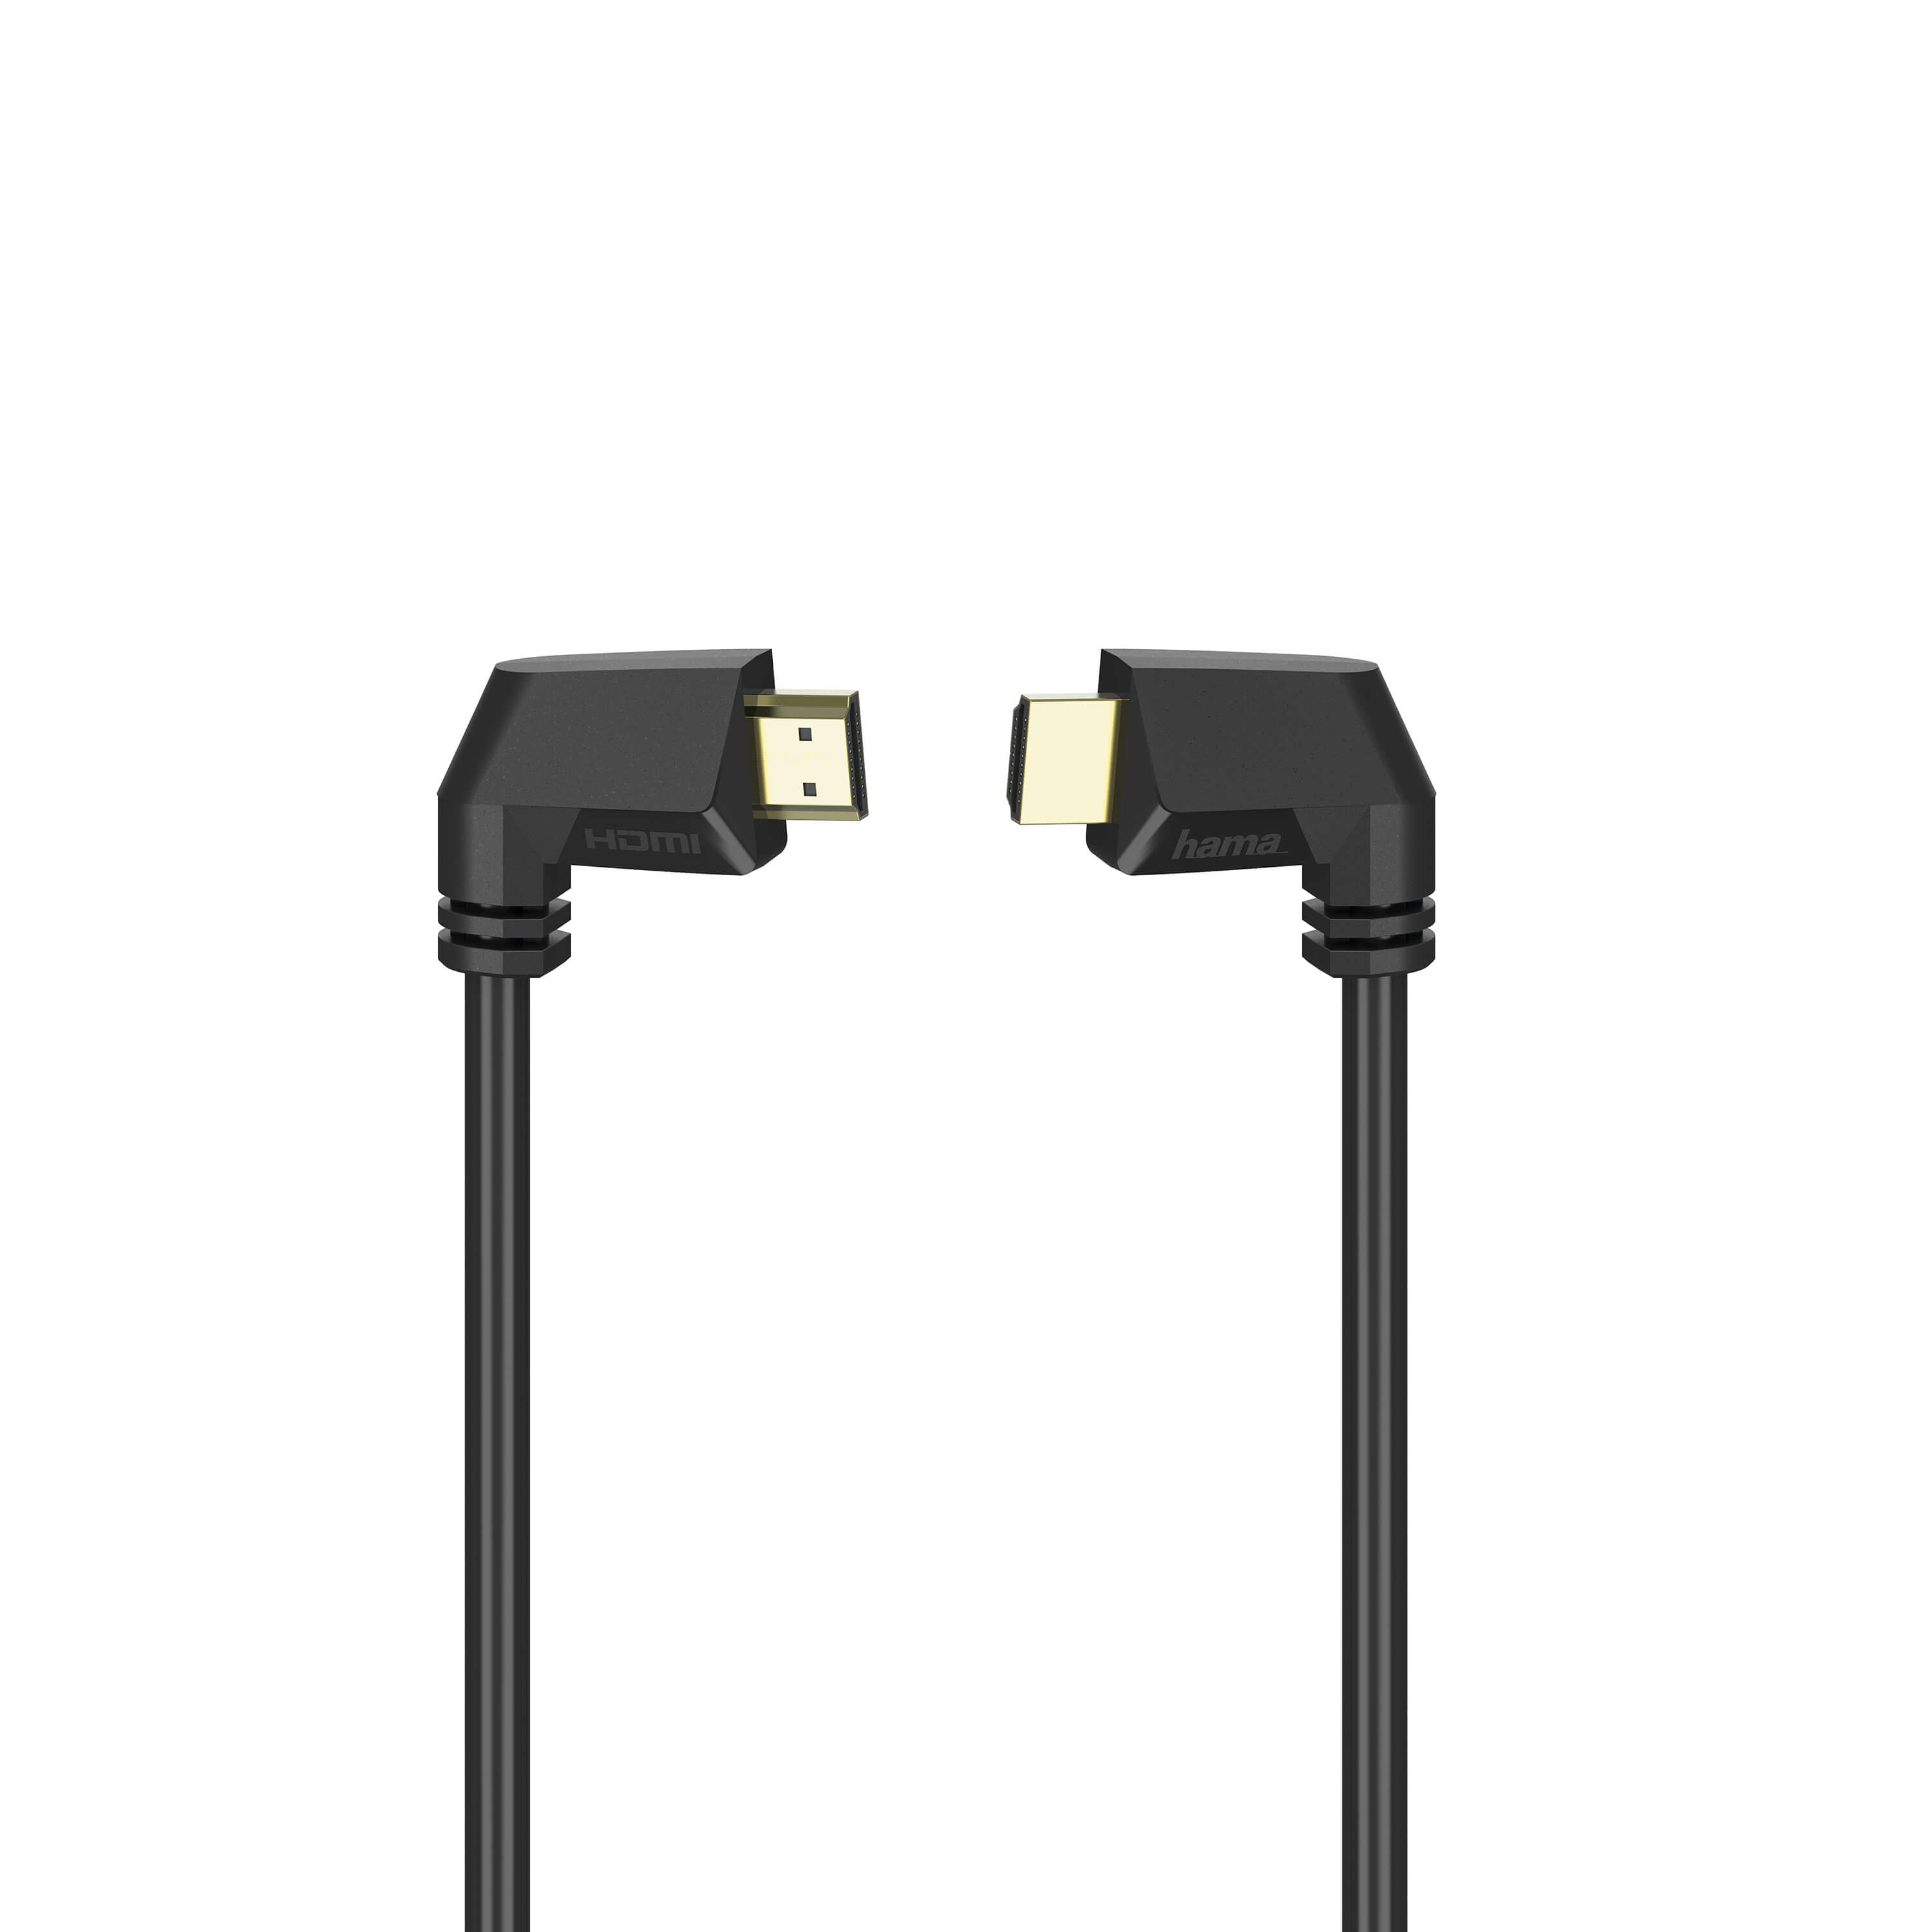 HAMA HDI Cable Ethernet Angled Gold Black 1.5m